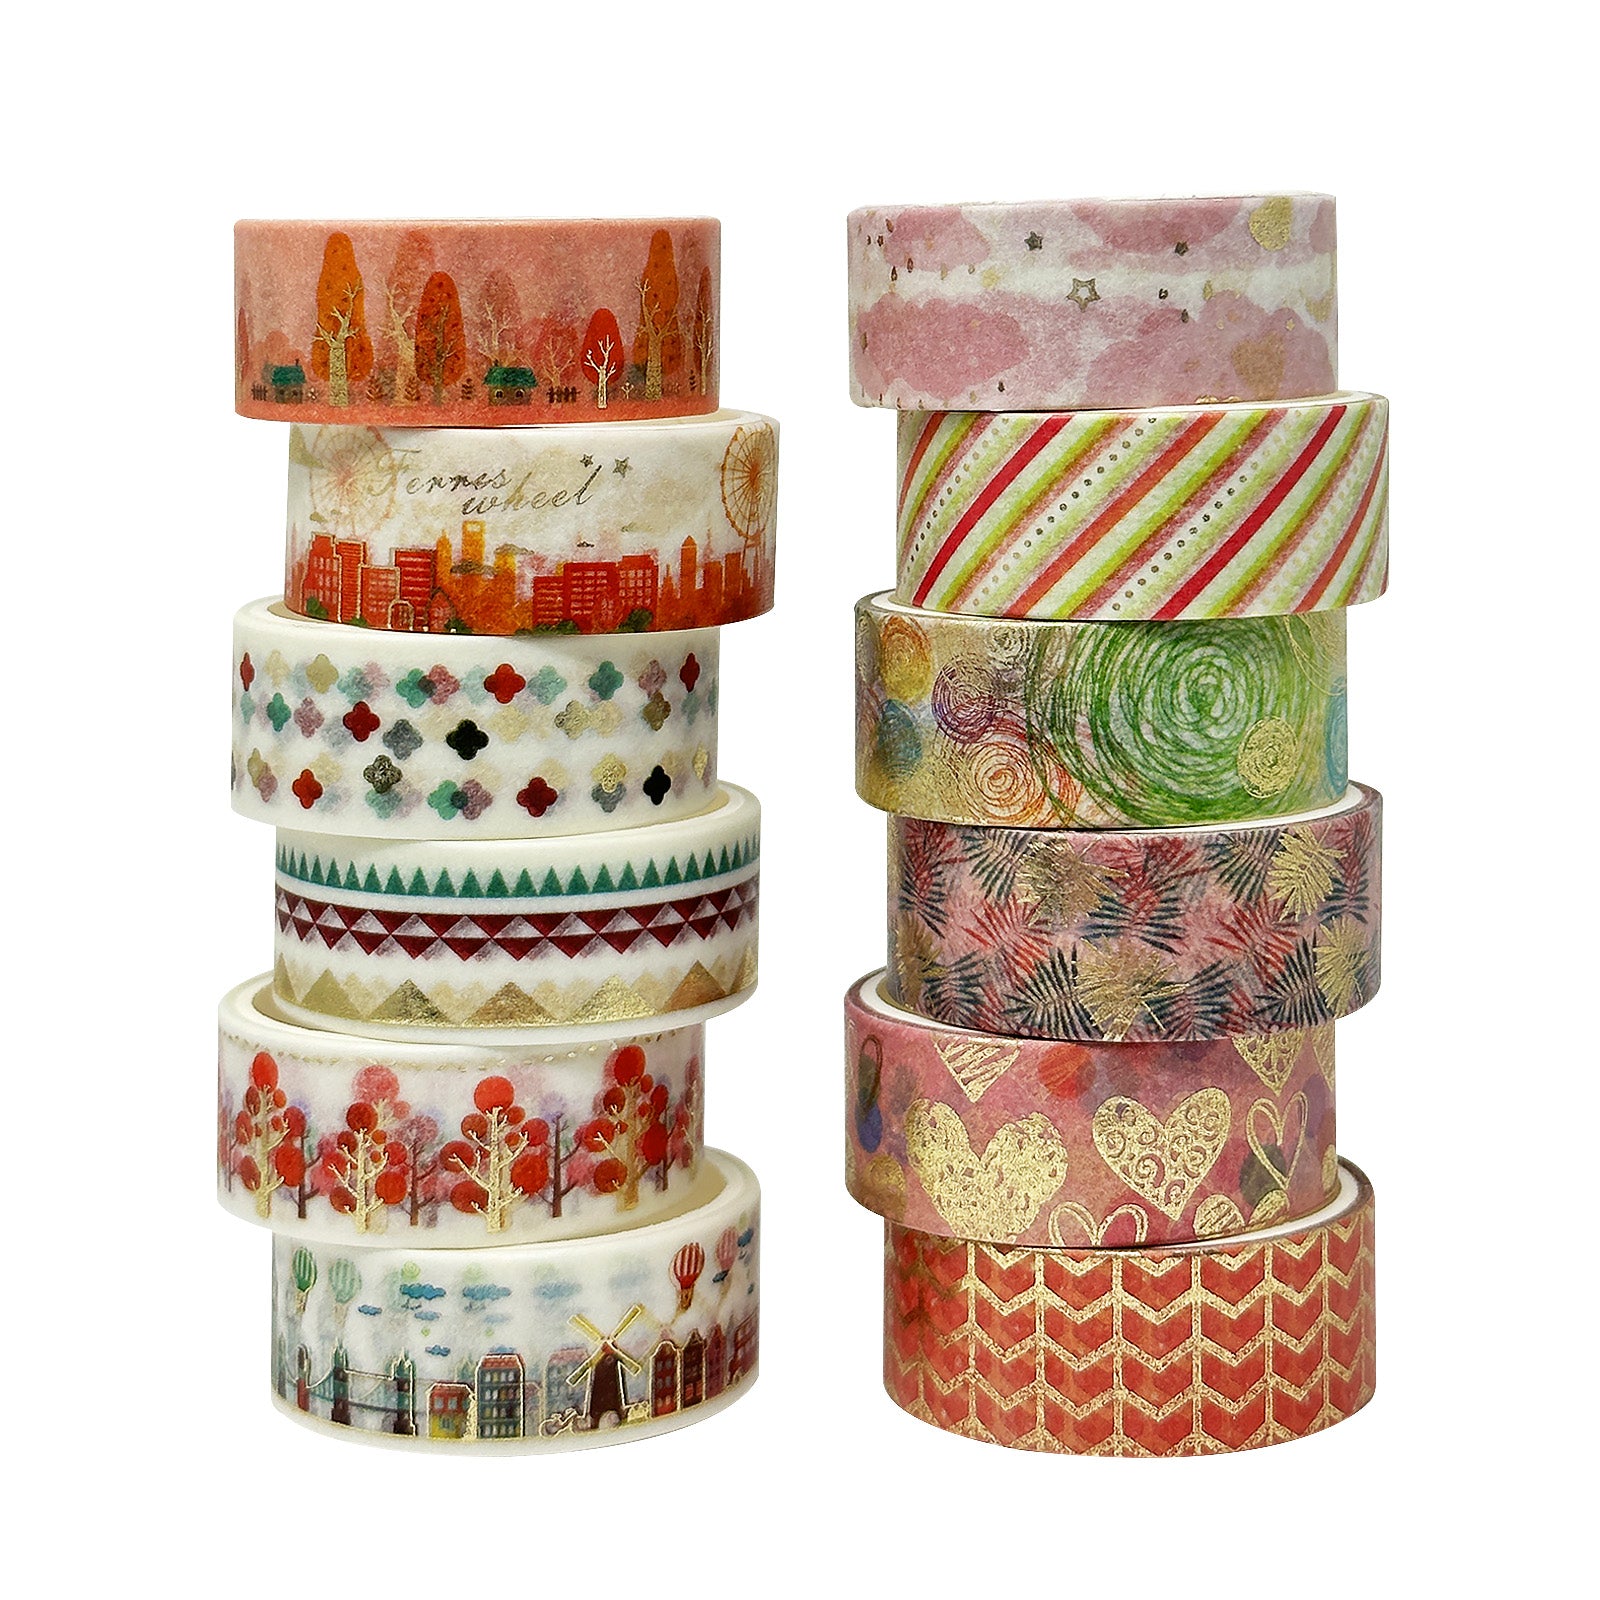 Wrapables Decorative Washi Tape Box Set for DIY Arts & Crafts,  Scrapbooking, Diary, Stationery, Card-Making, Gift Wrapping (12 Rolls), Pink